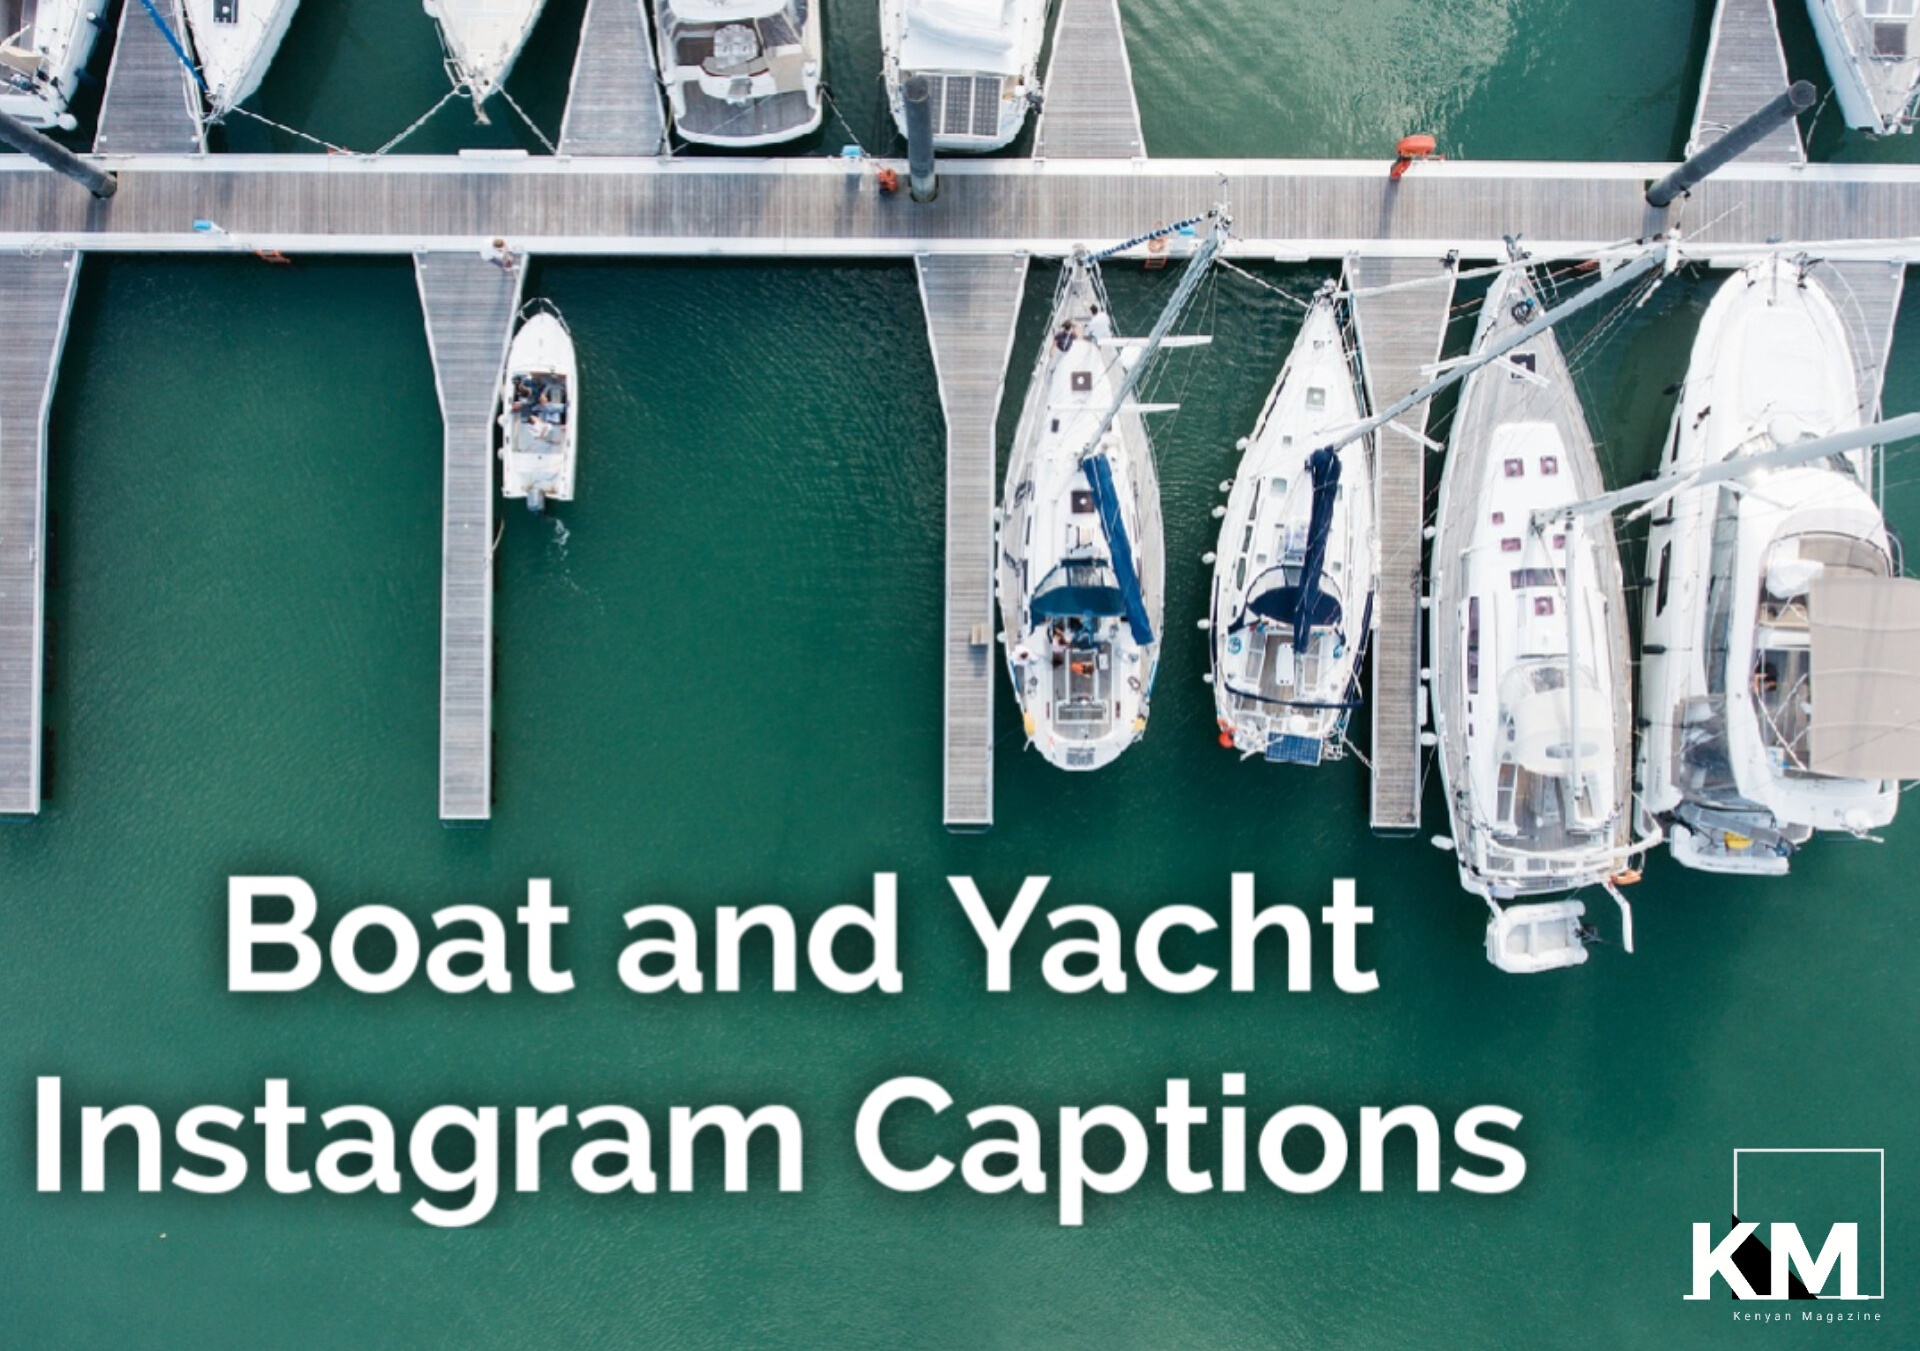 Boat and Yacht Instagram Captions